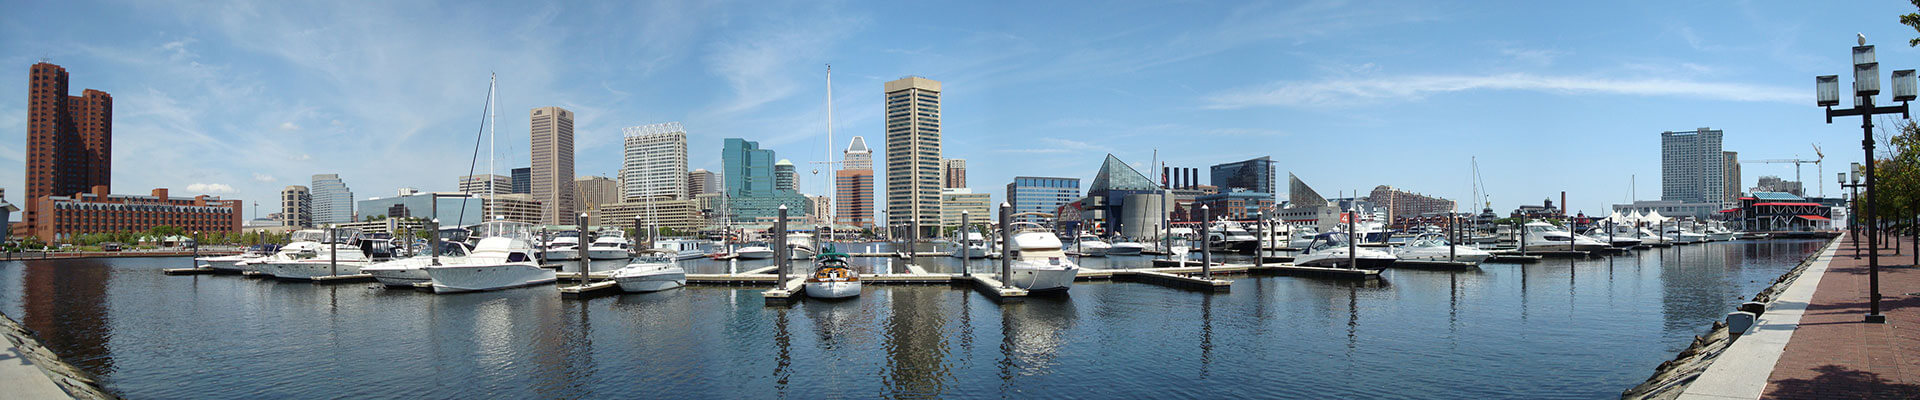 harbour-baltimore-maryland